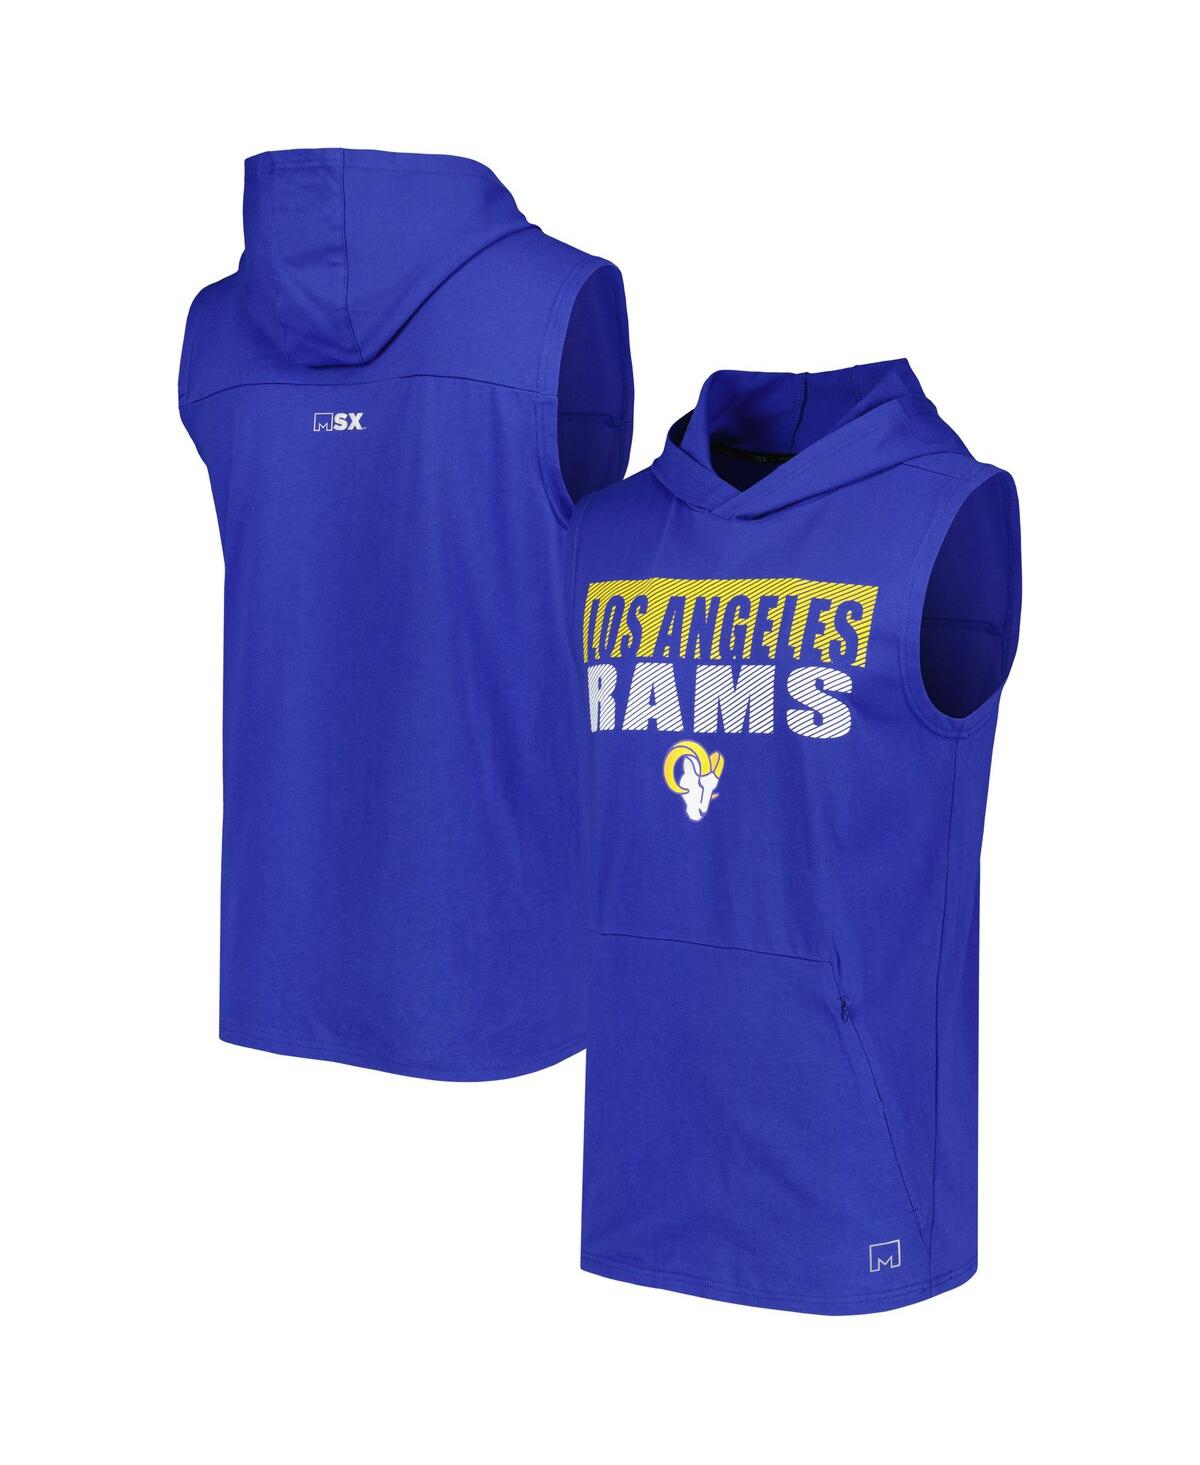 Msx By Michael Strahan Men's  Royal Los Angeles Rams Relay Sleeveless Pullover Hoodie